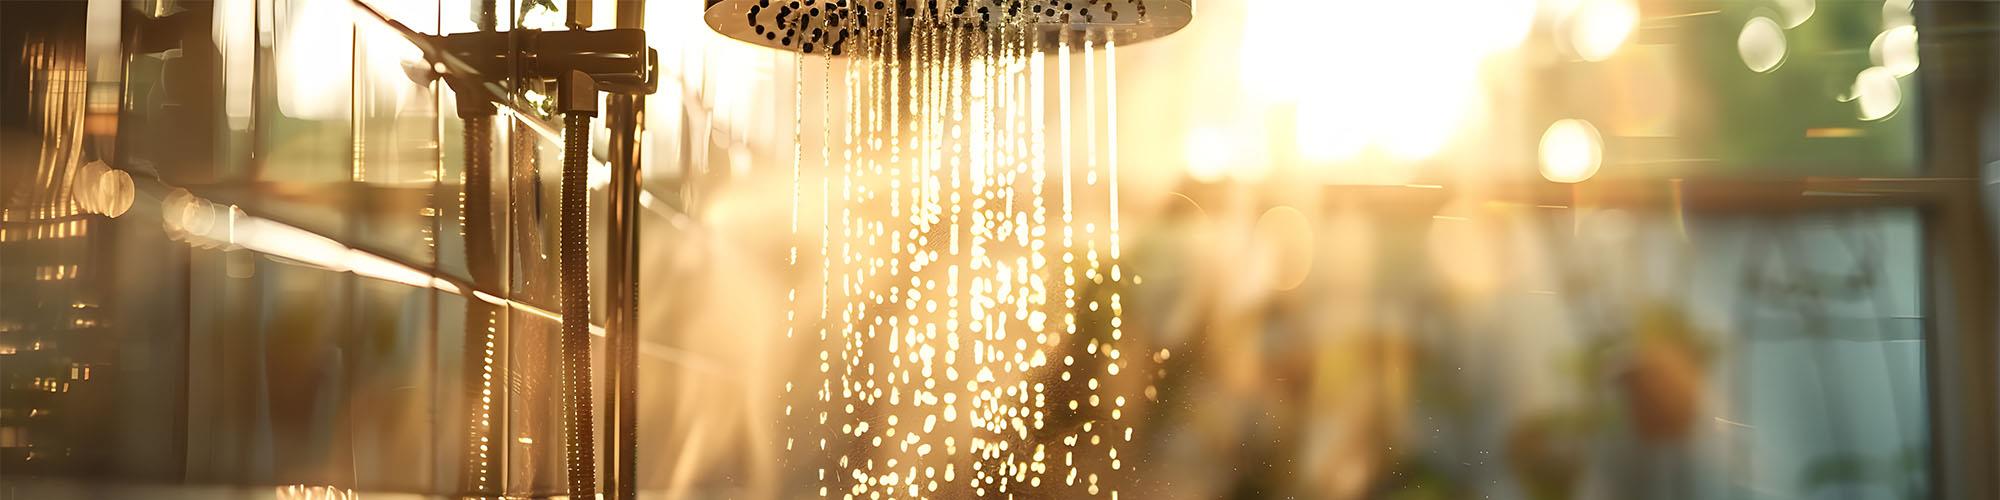 shower head with sun shining behind